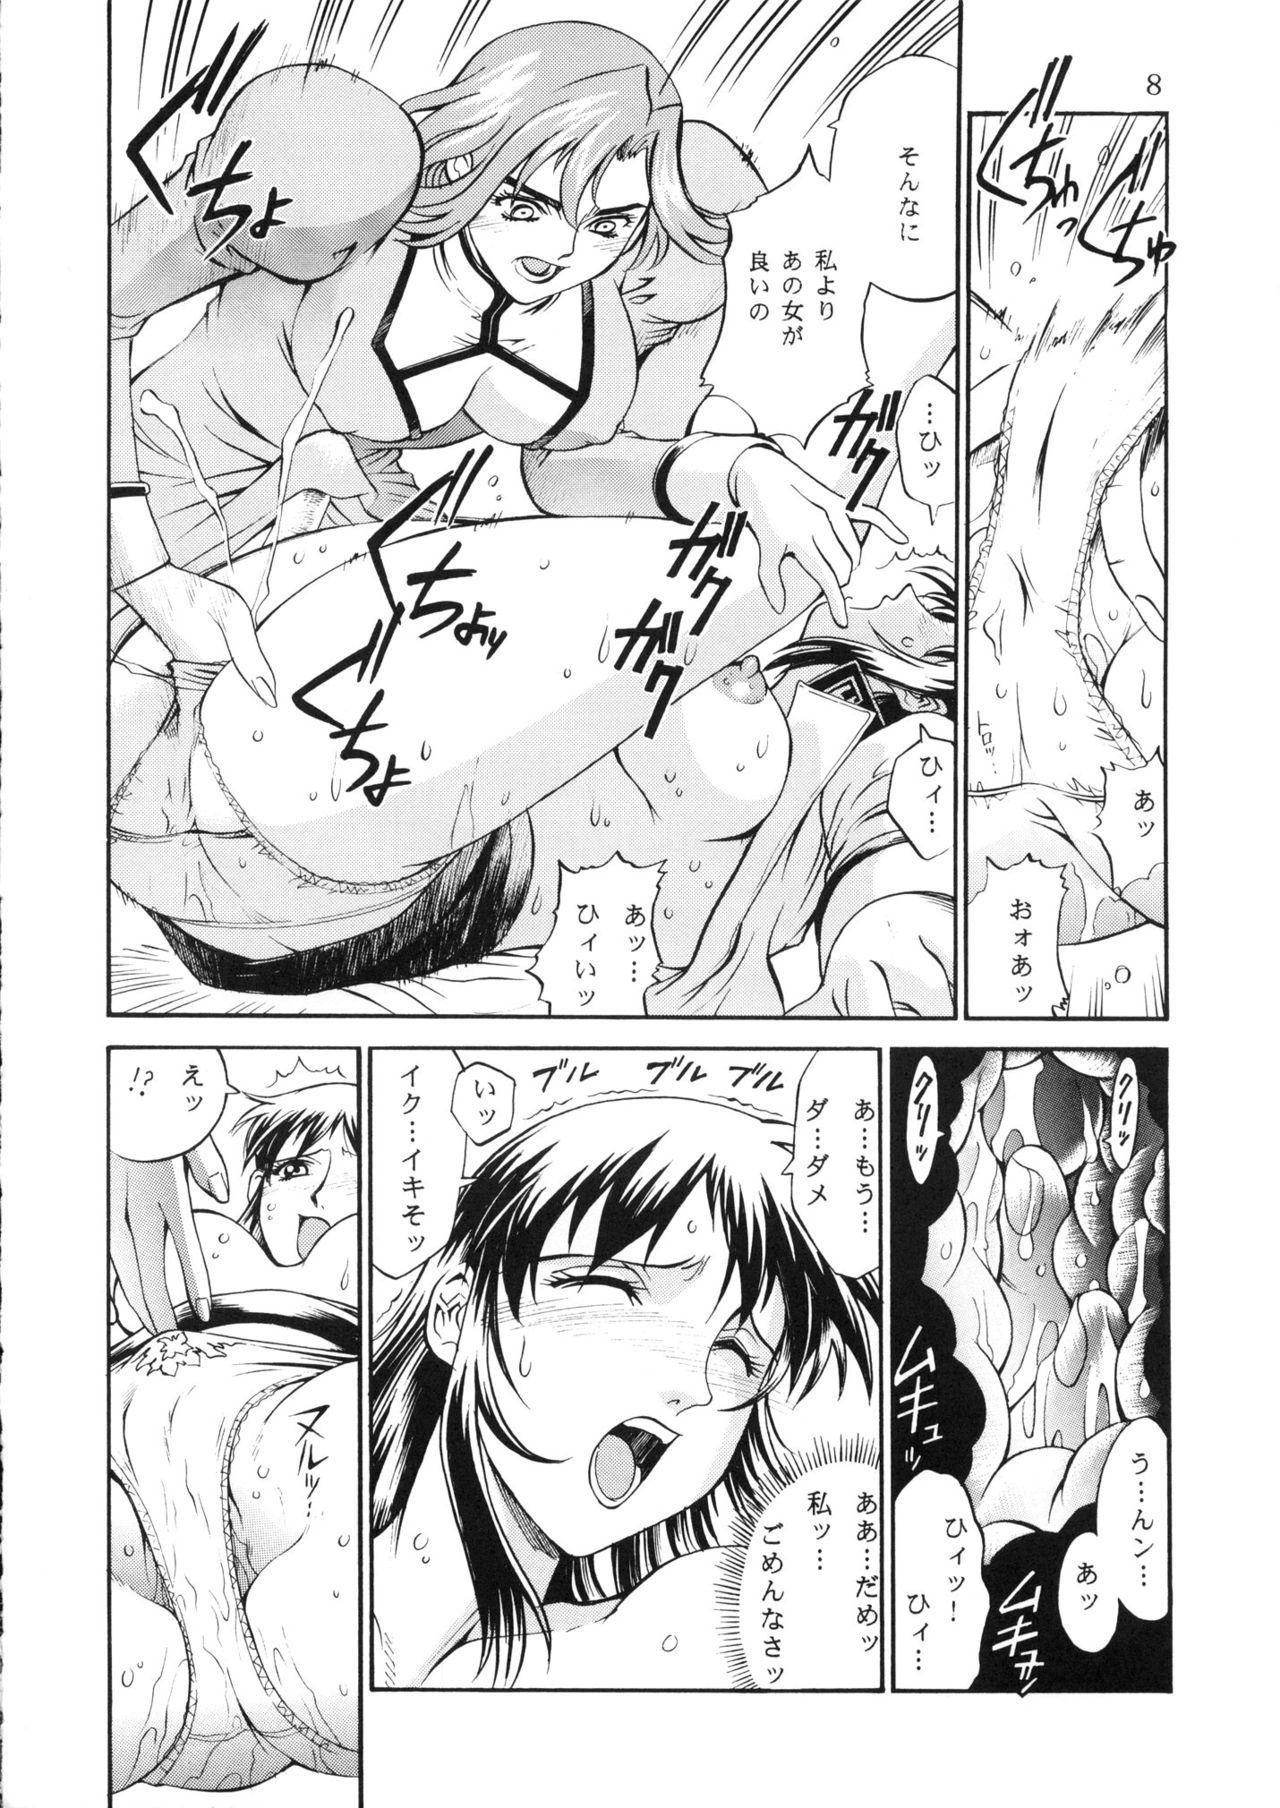 Gay Physicals DENGEKI - Agent aika Nudes - Page 8